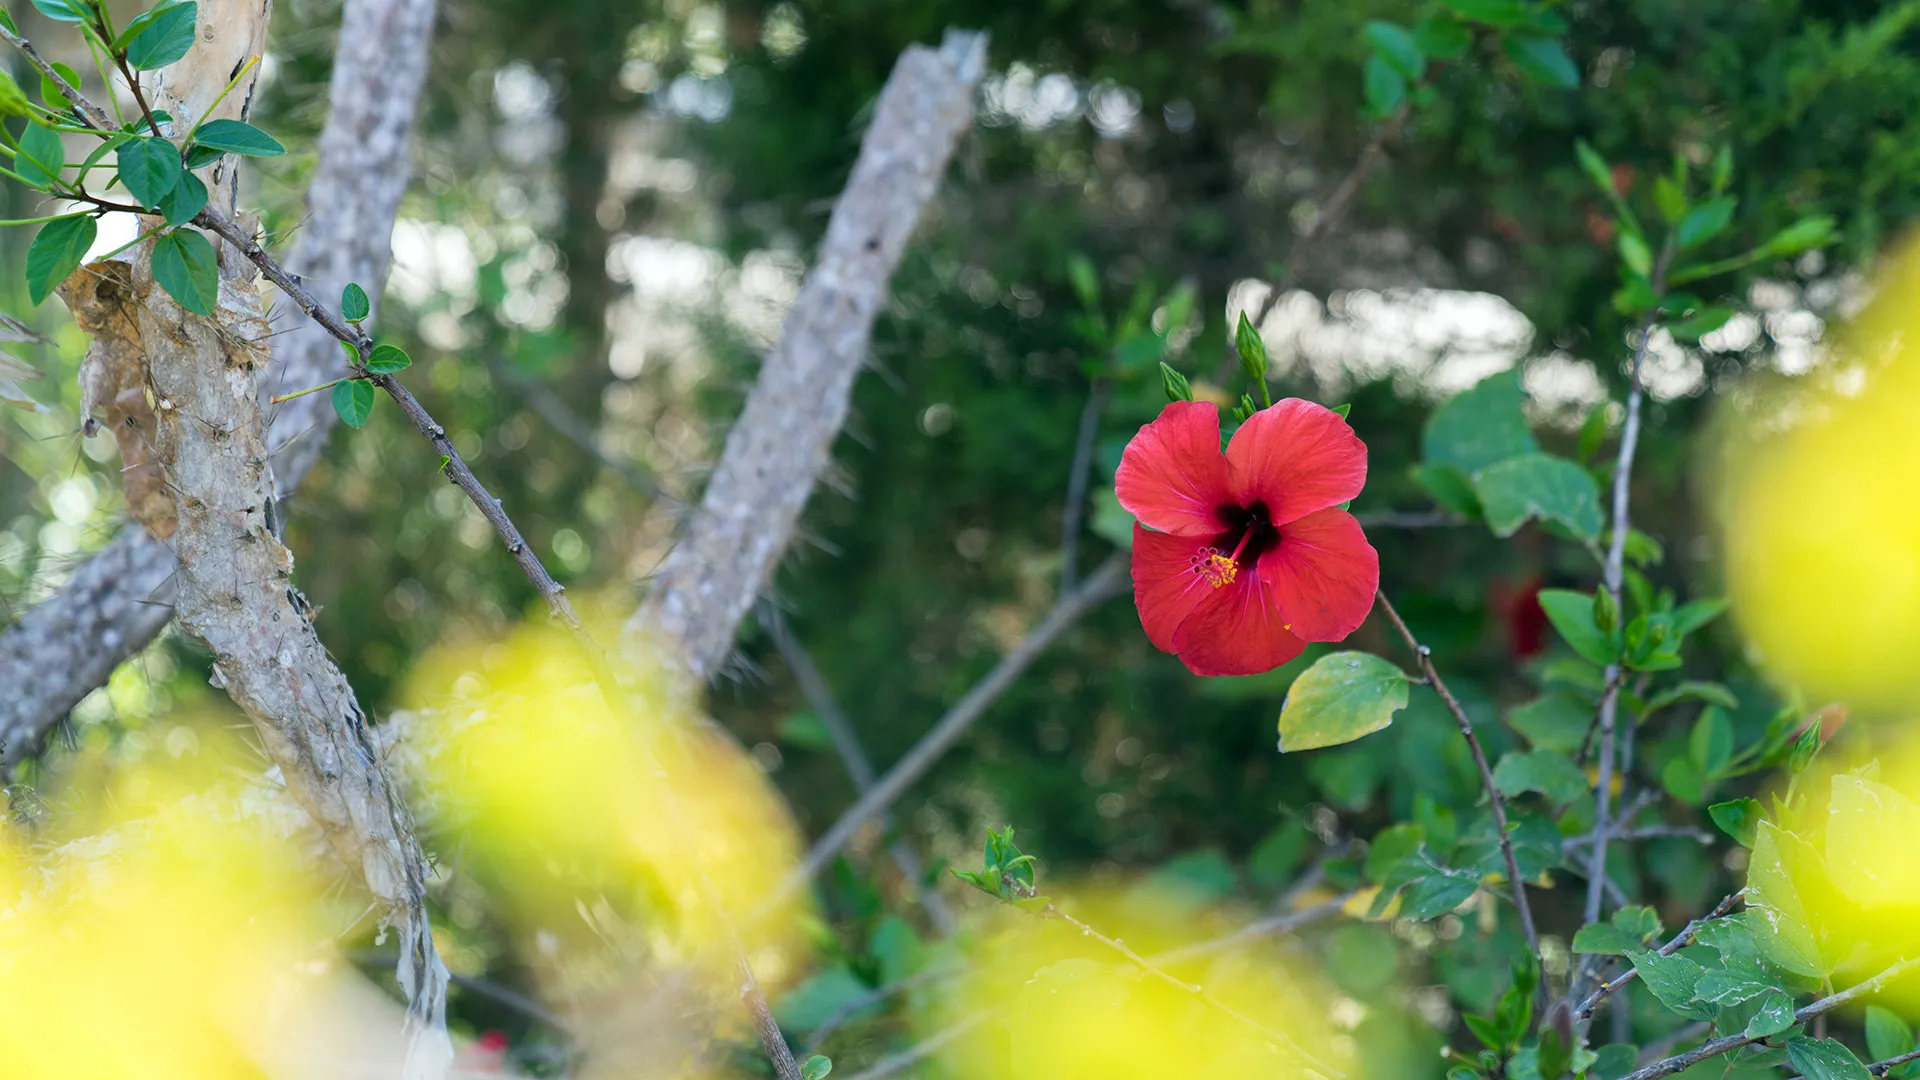 Photo showing: 500px provided description: A hibiscus flower in the garden of a country house in Menorca / Spain. [#yellow ,#red ,#color ,#nature ,#flower ,#tree ,#summer ,#bokeh ,#leaf ,#green ,#garden ,#flora ,#cactus ,#outdoors ,#menorca ,#no person]